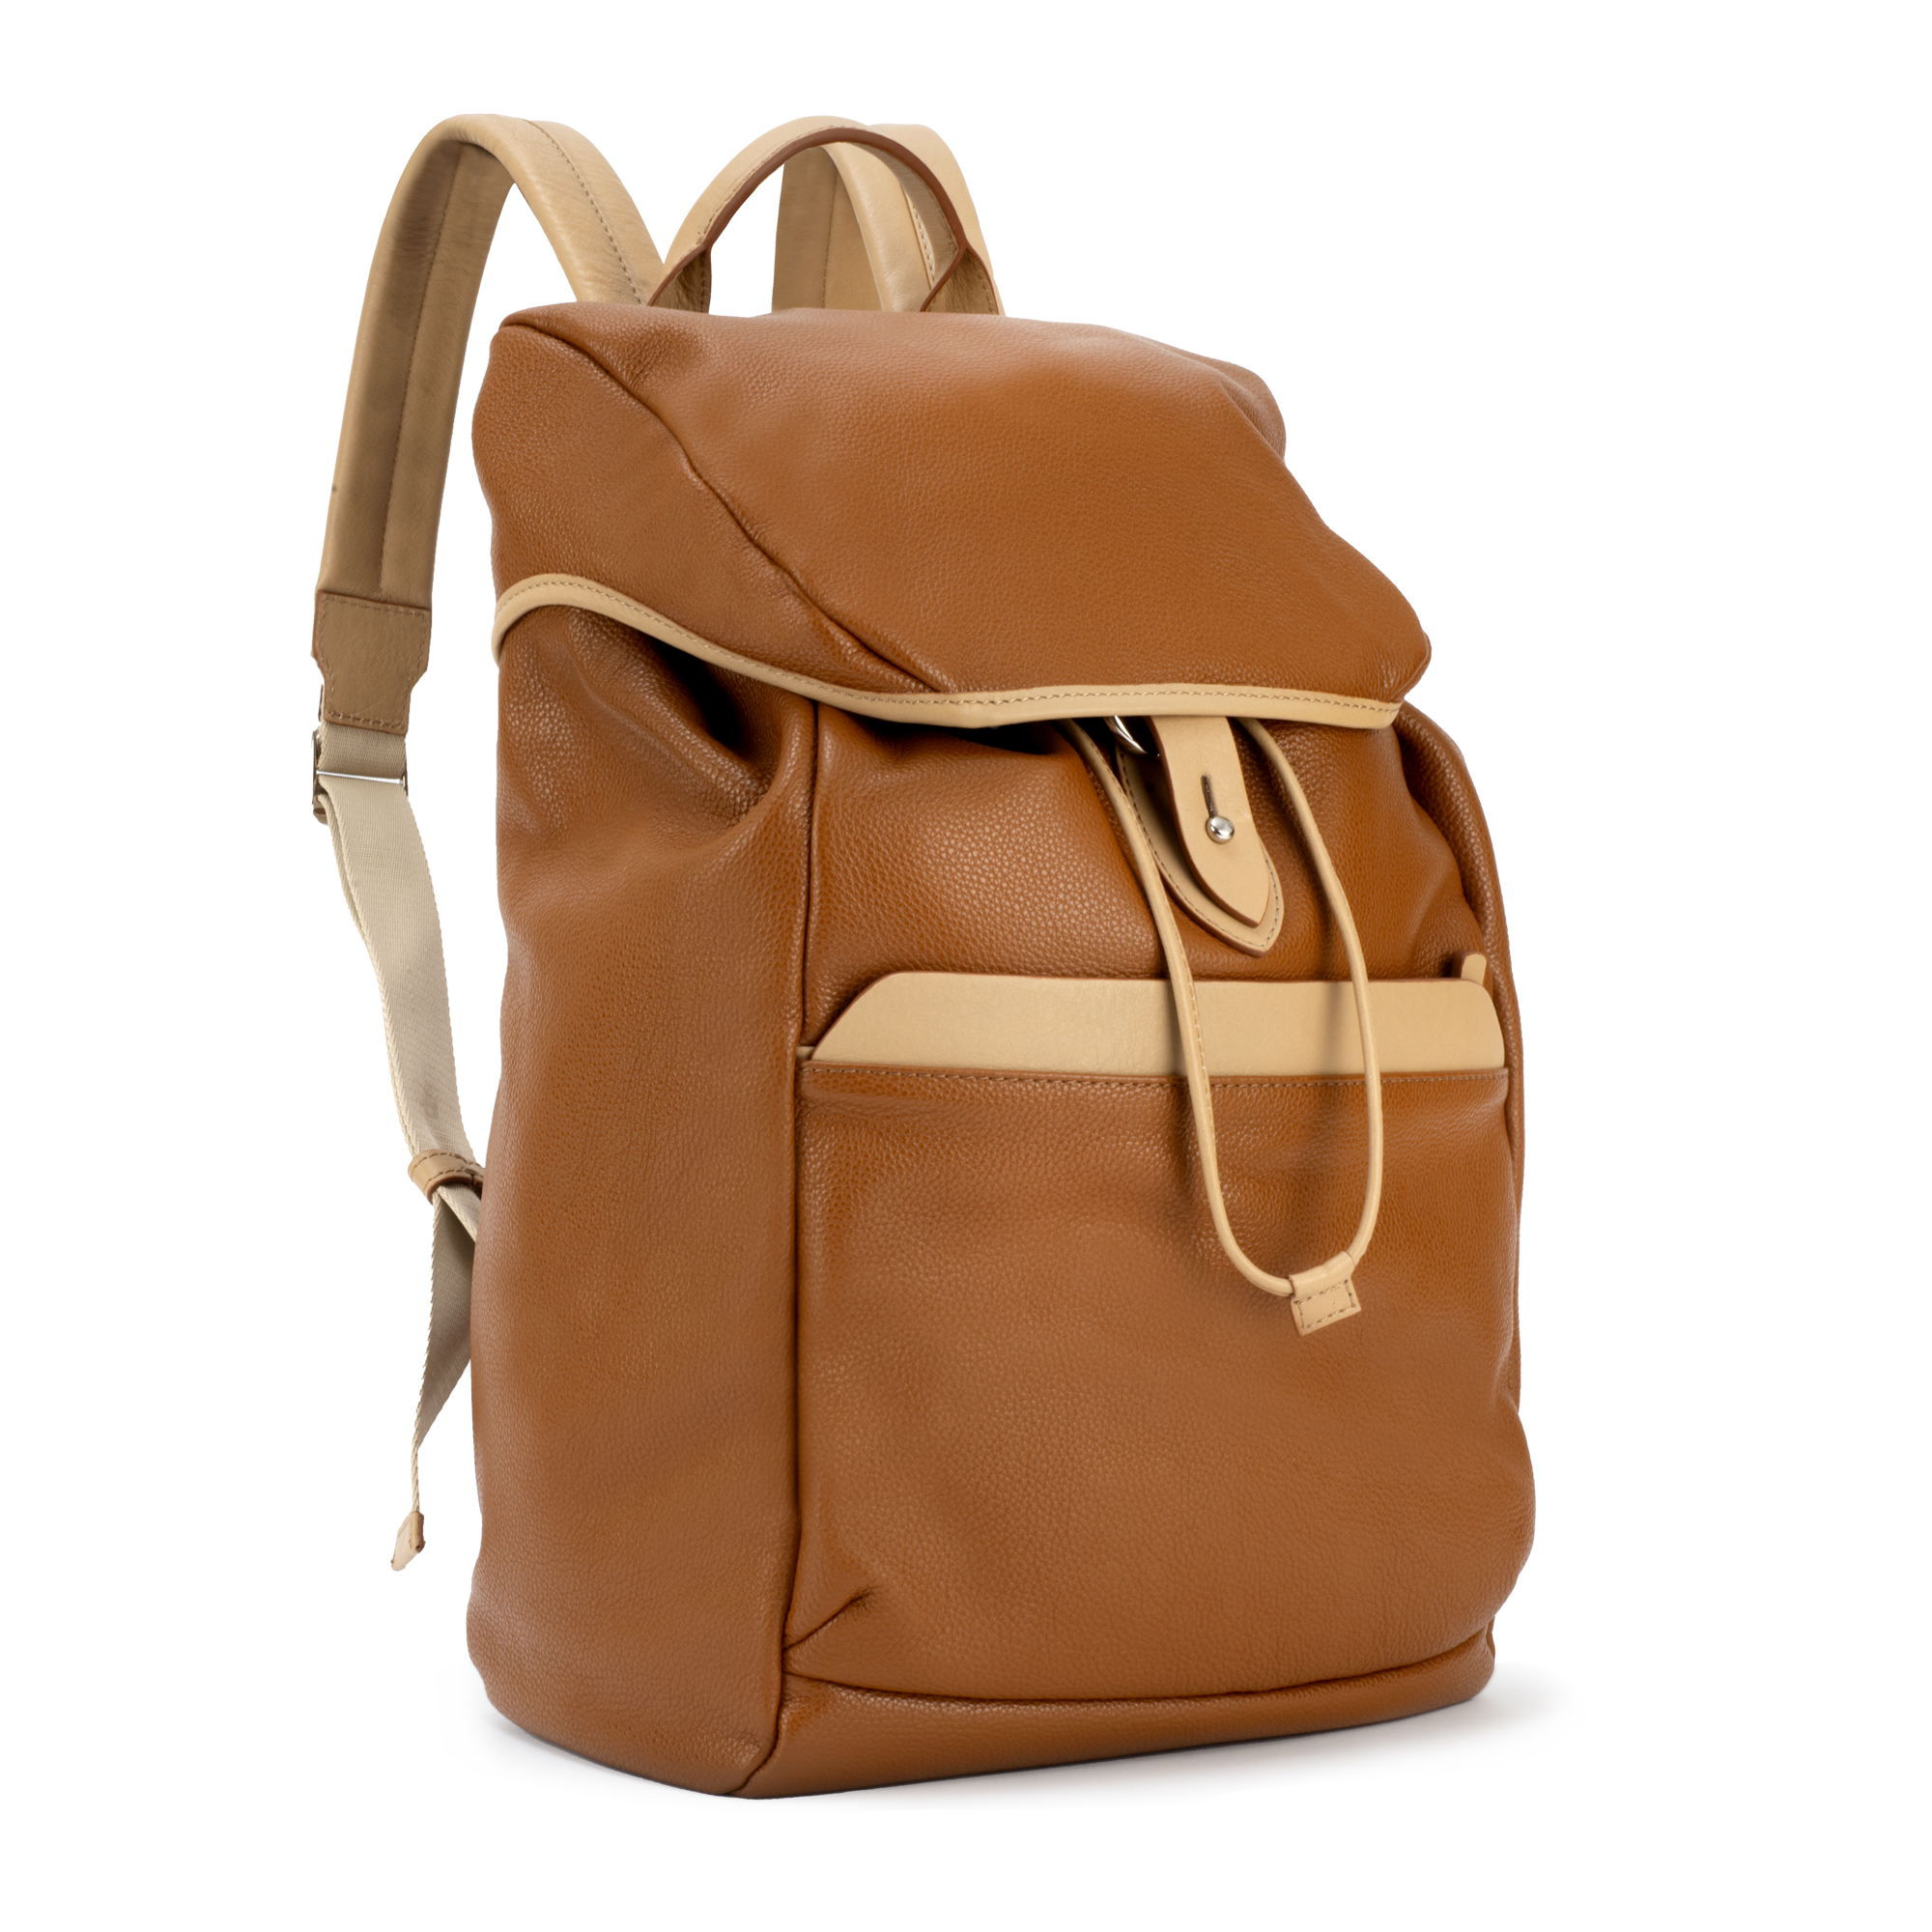 853 - NWA <br> Recycled leather backpack